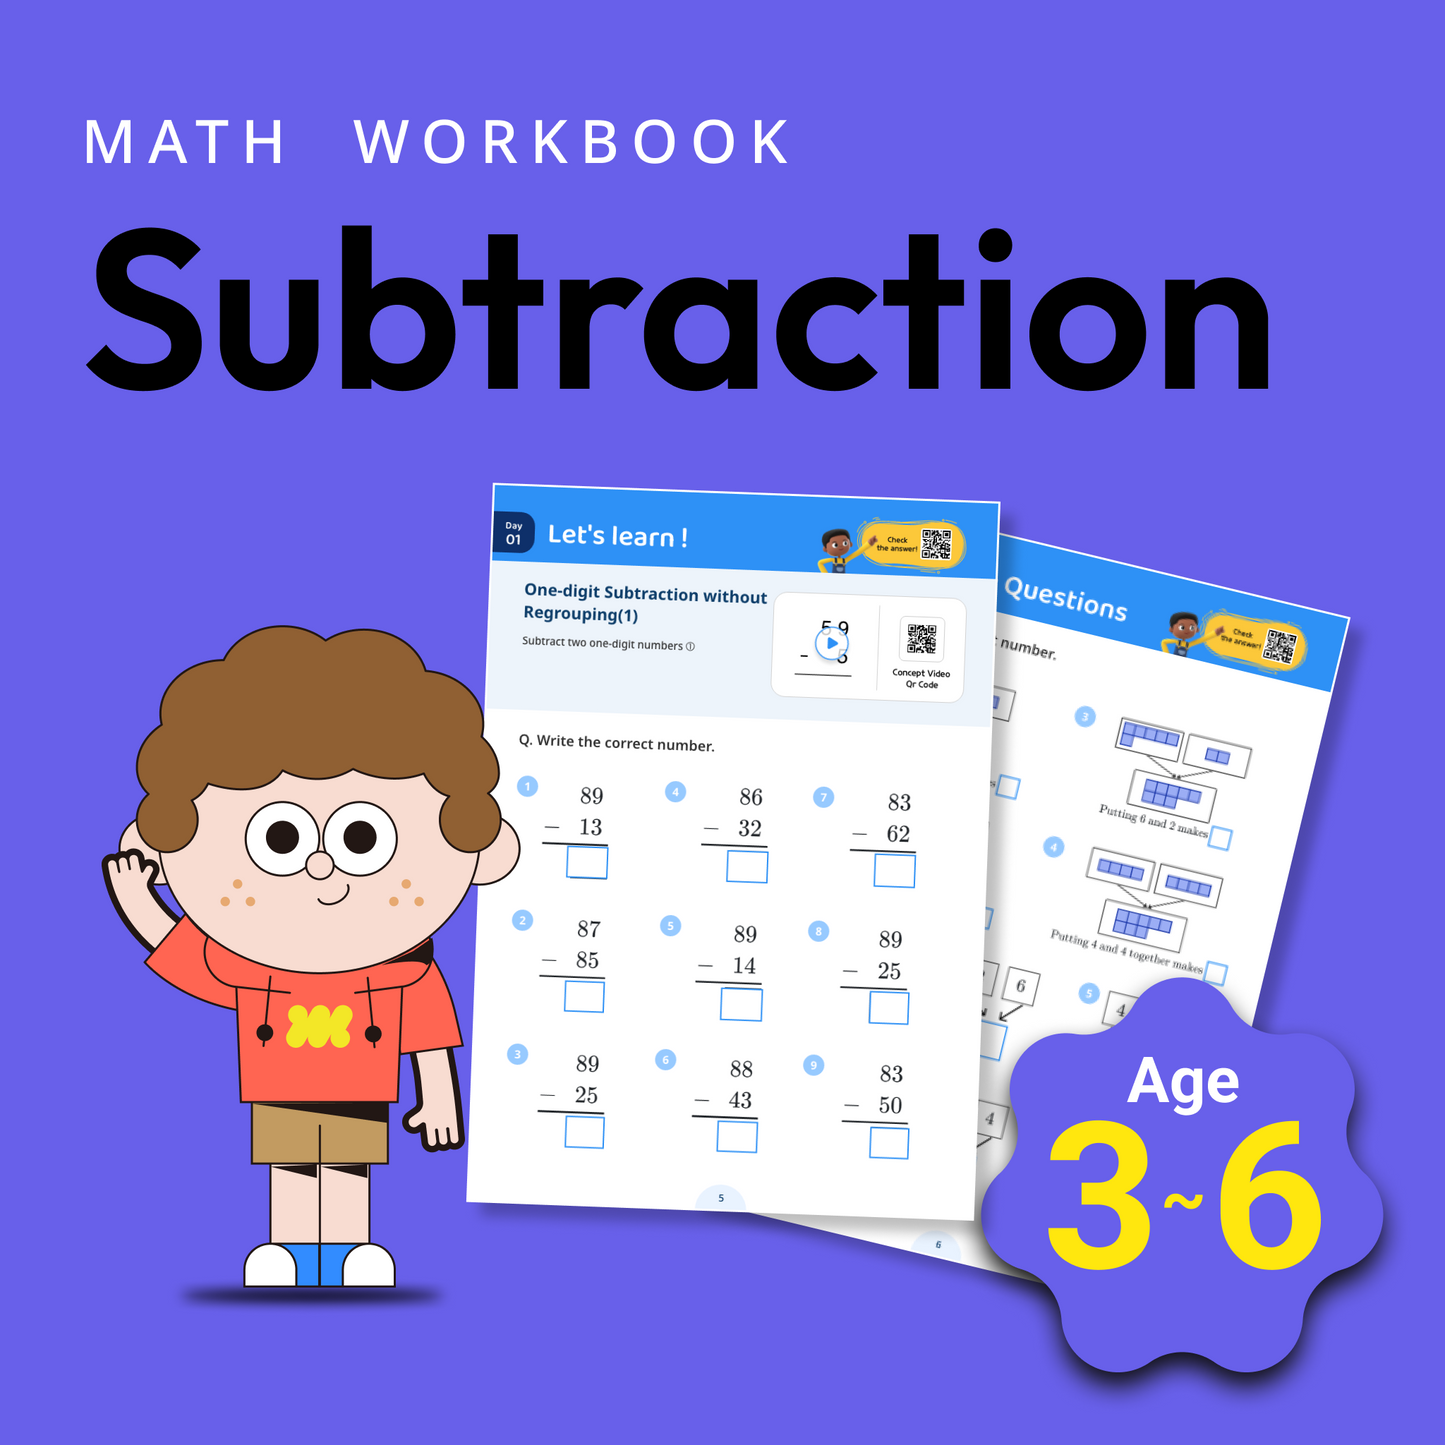 Subtract_two_one-digit_numbers3